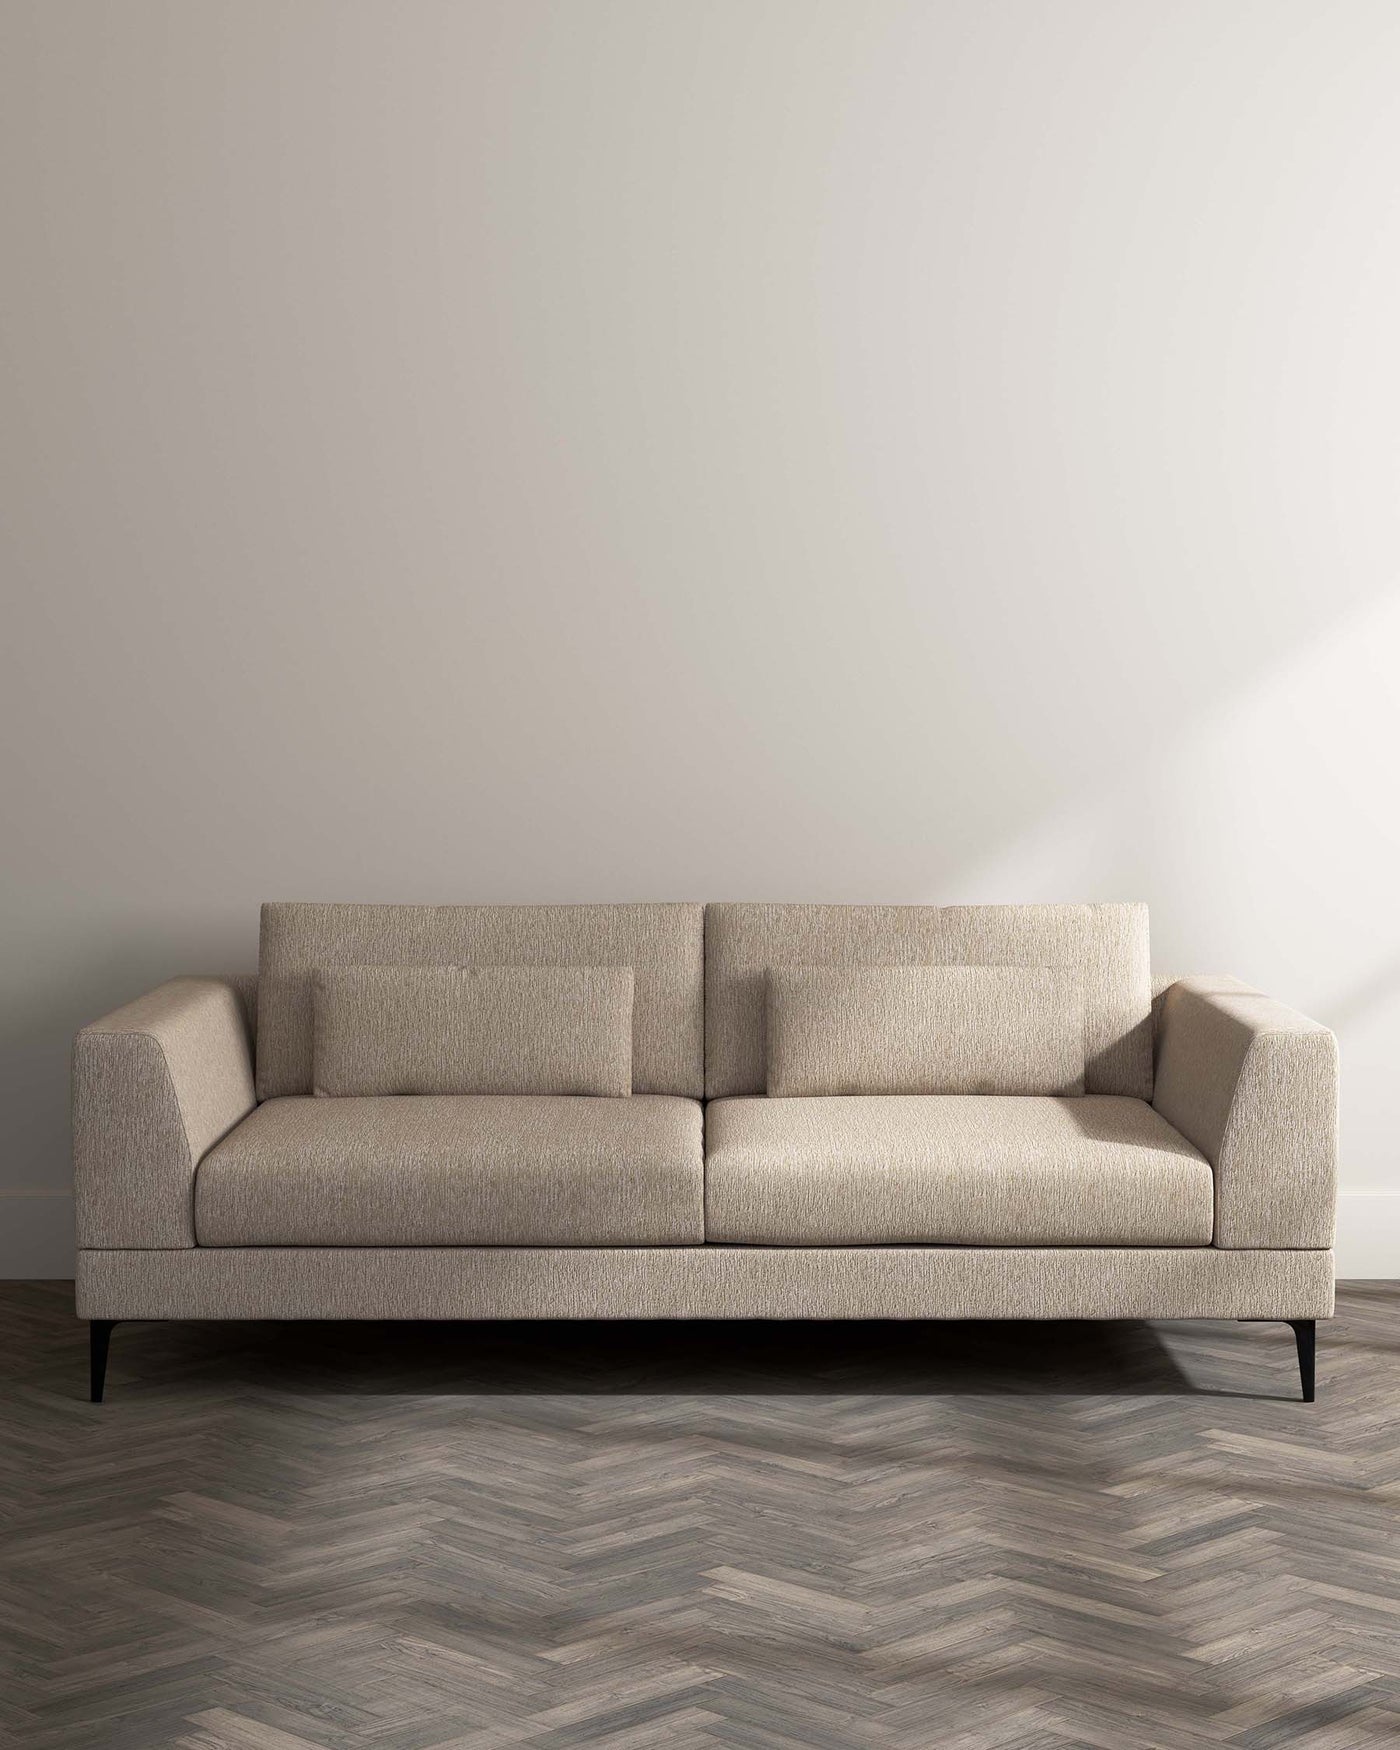 Contemporary three-seater sofa featuring a textured beige upholstery, clean lines, square arms, and tapered black legs. Positioned against a neutral backdrop on a herringbone pattern wooden floor.